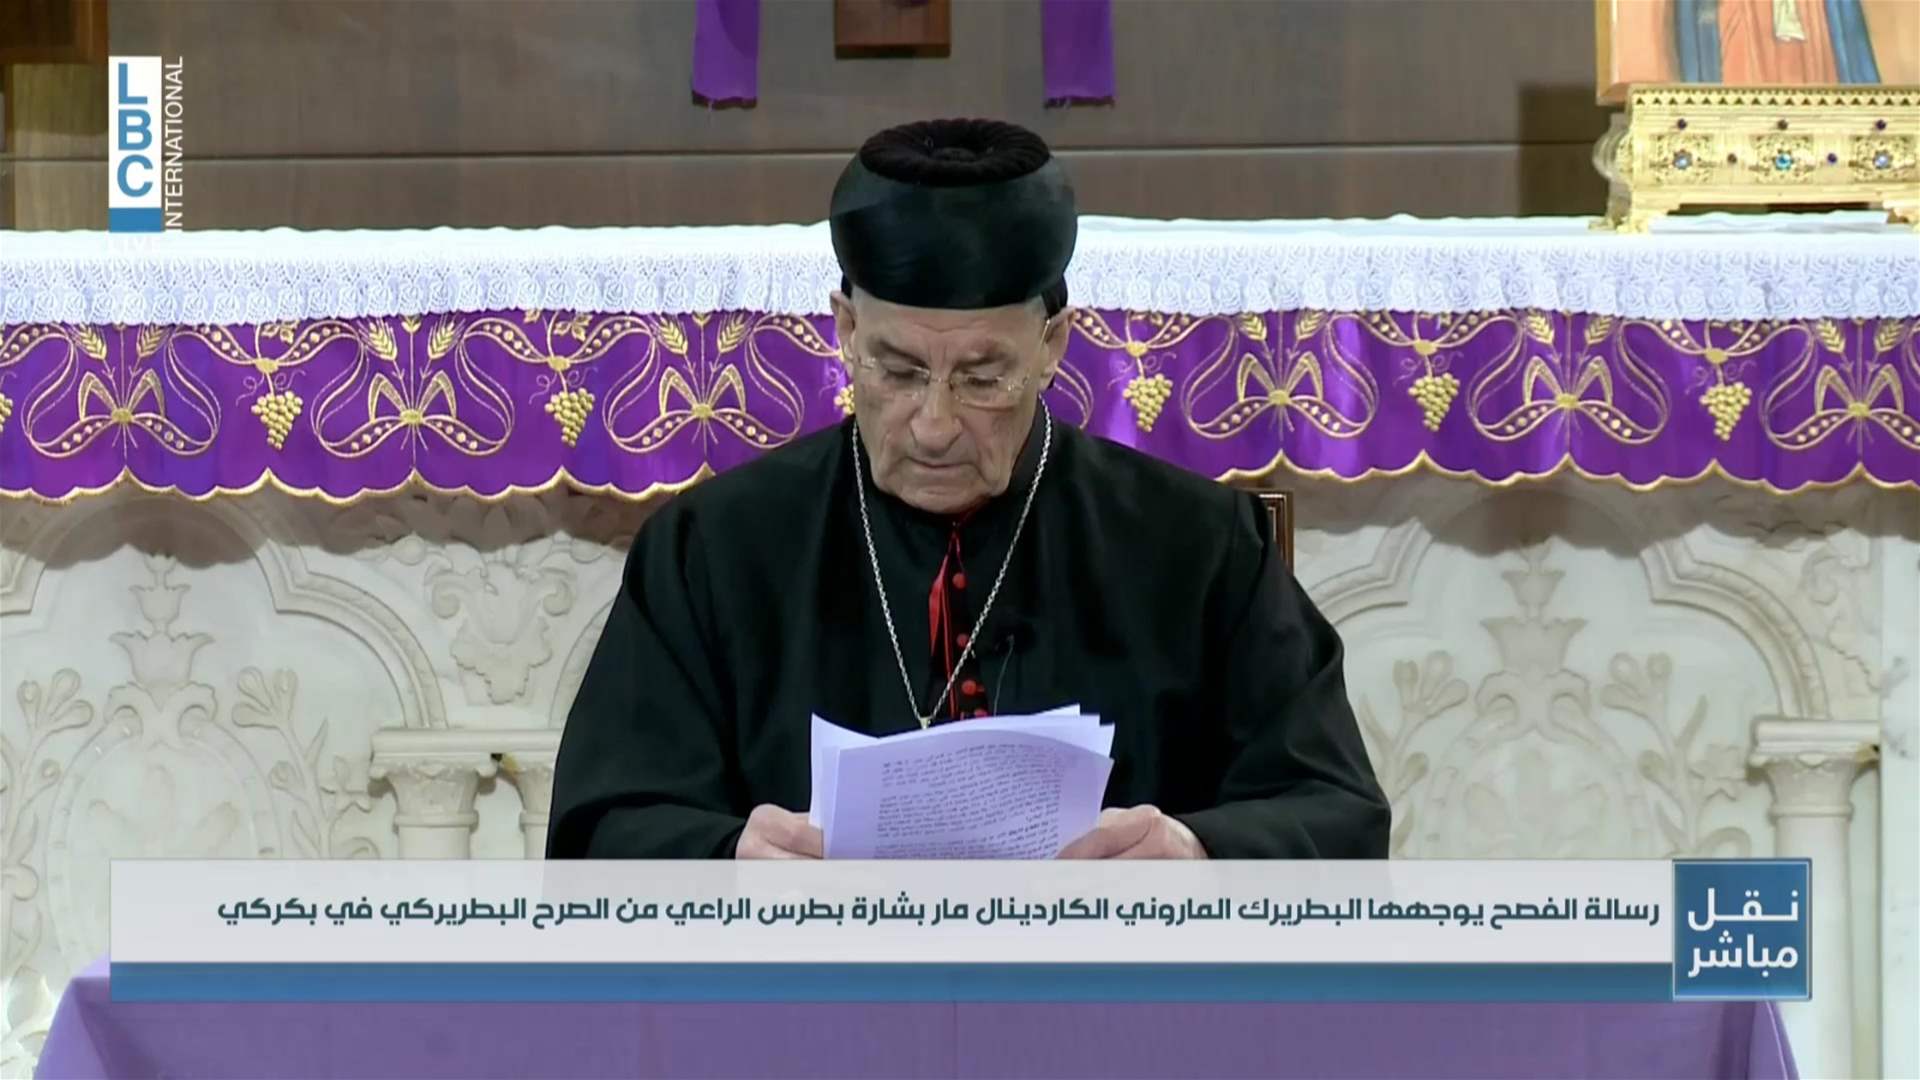 Protecting Lebanon&#39;s identity: Patriarch al-Rahi advocates for neutrality amid foreign pressures